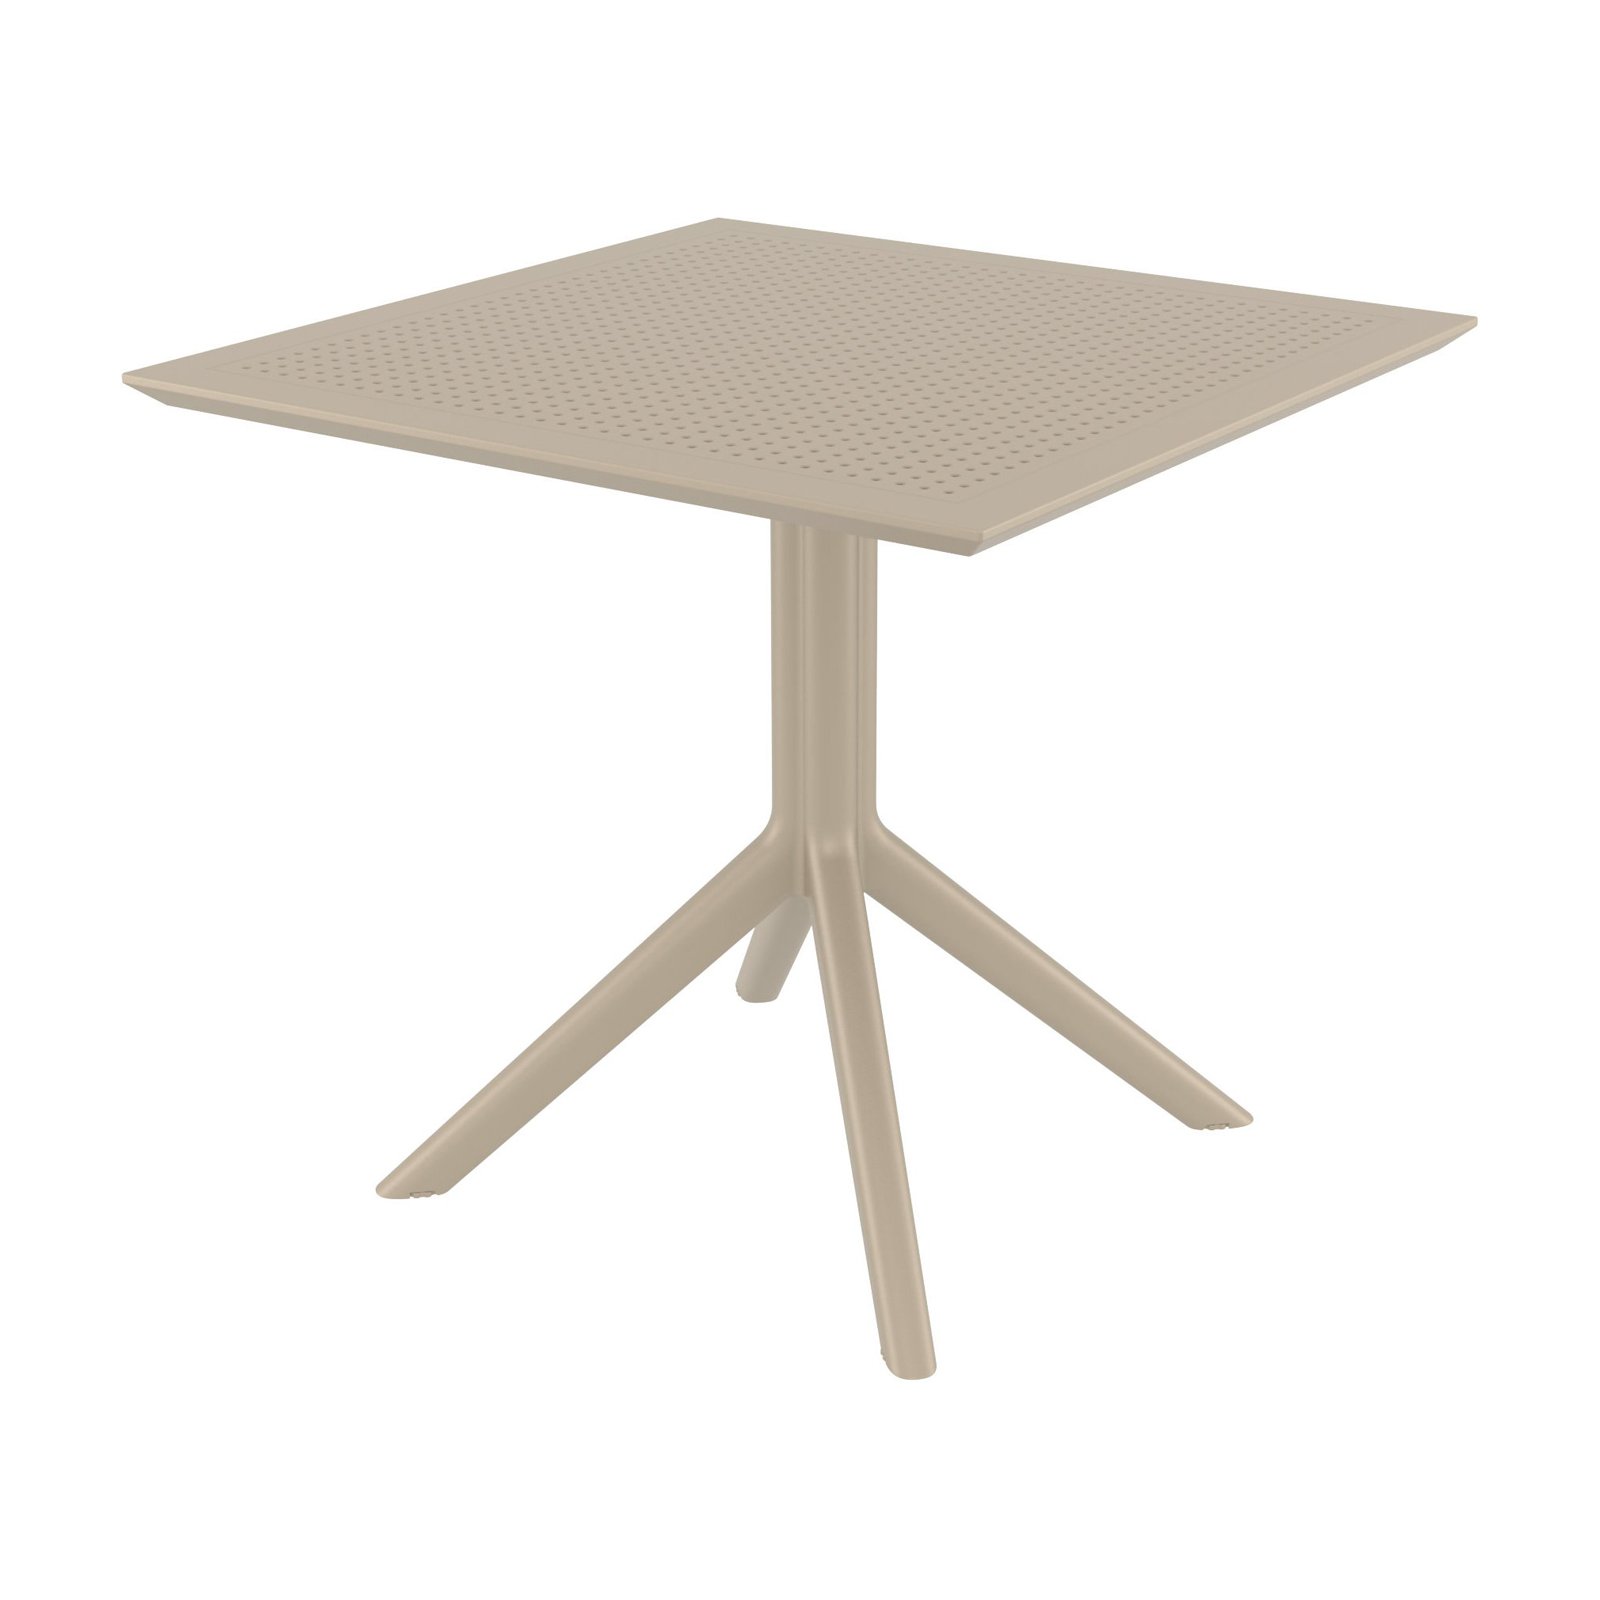 Compamia Sky 32" Square Patio Bistro Table in Taupe - image 1 of 8